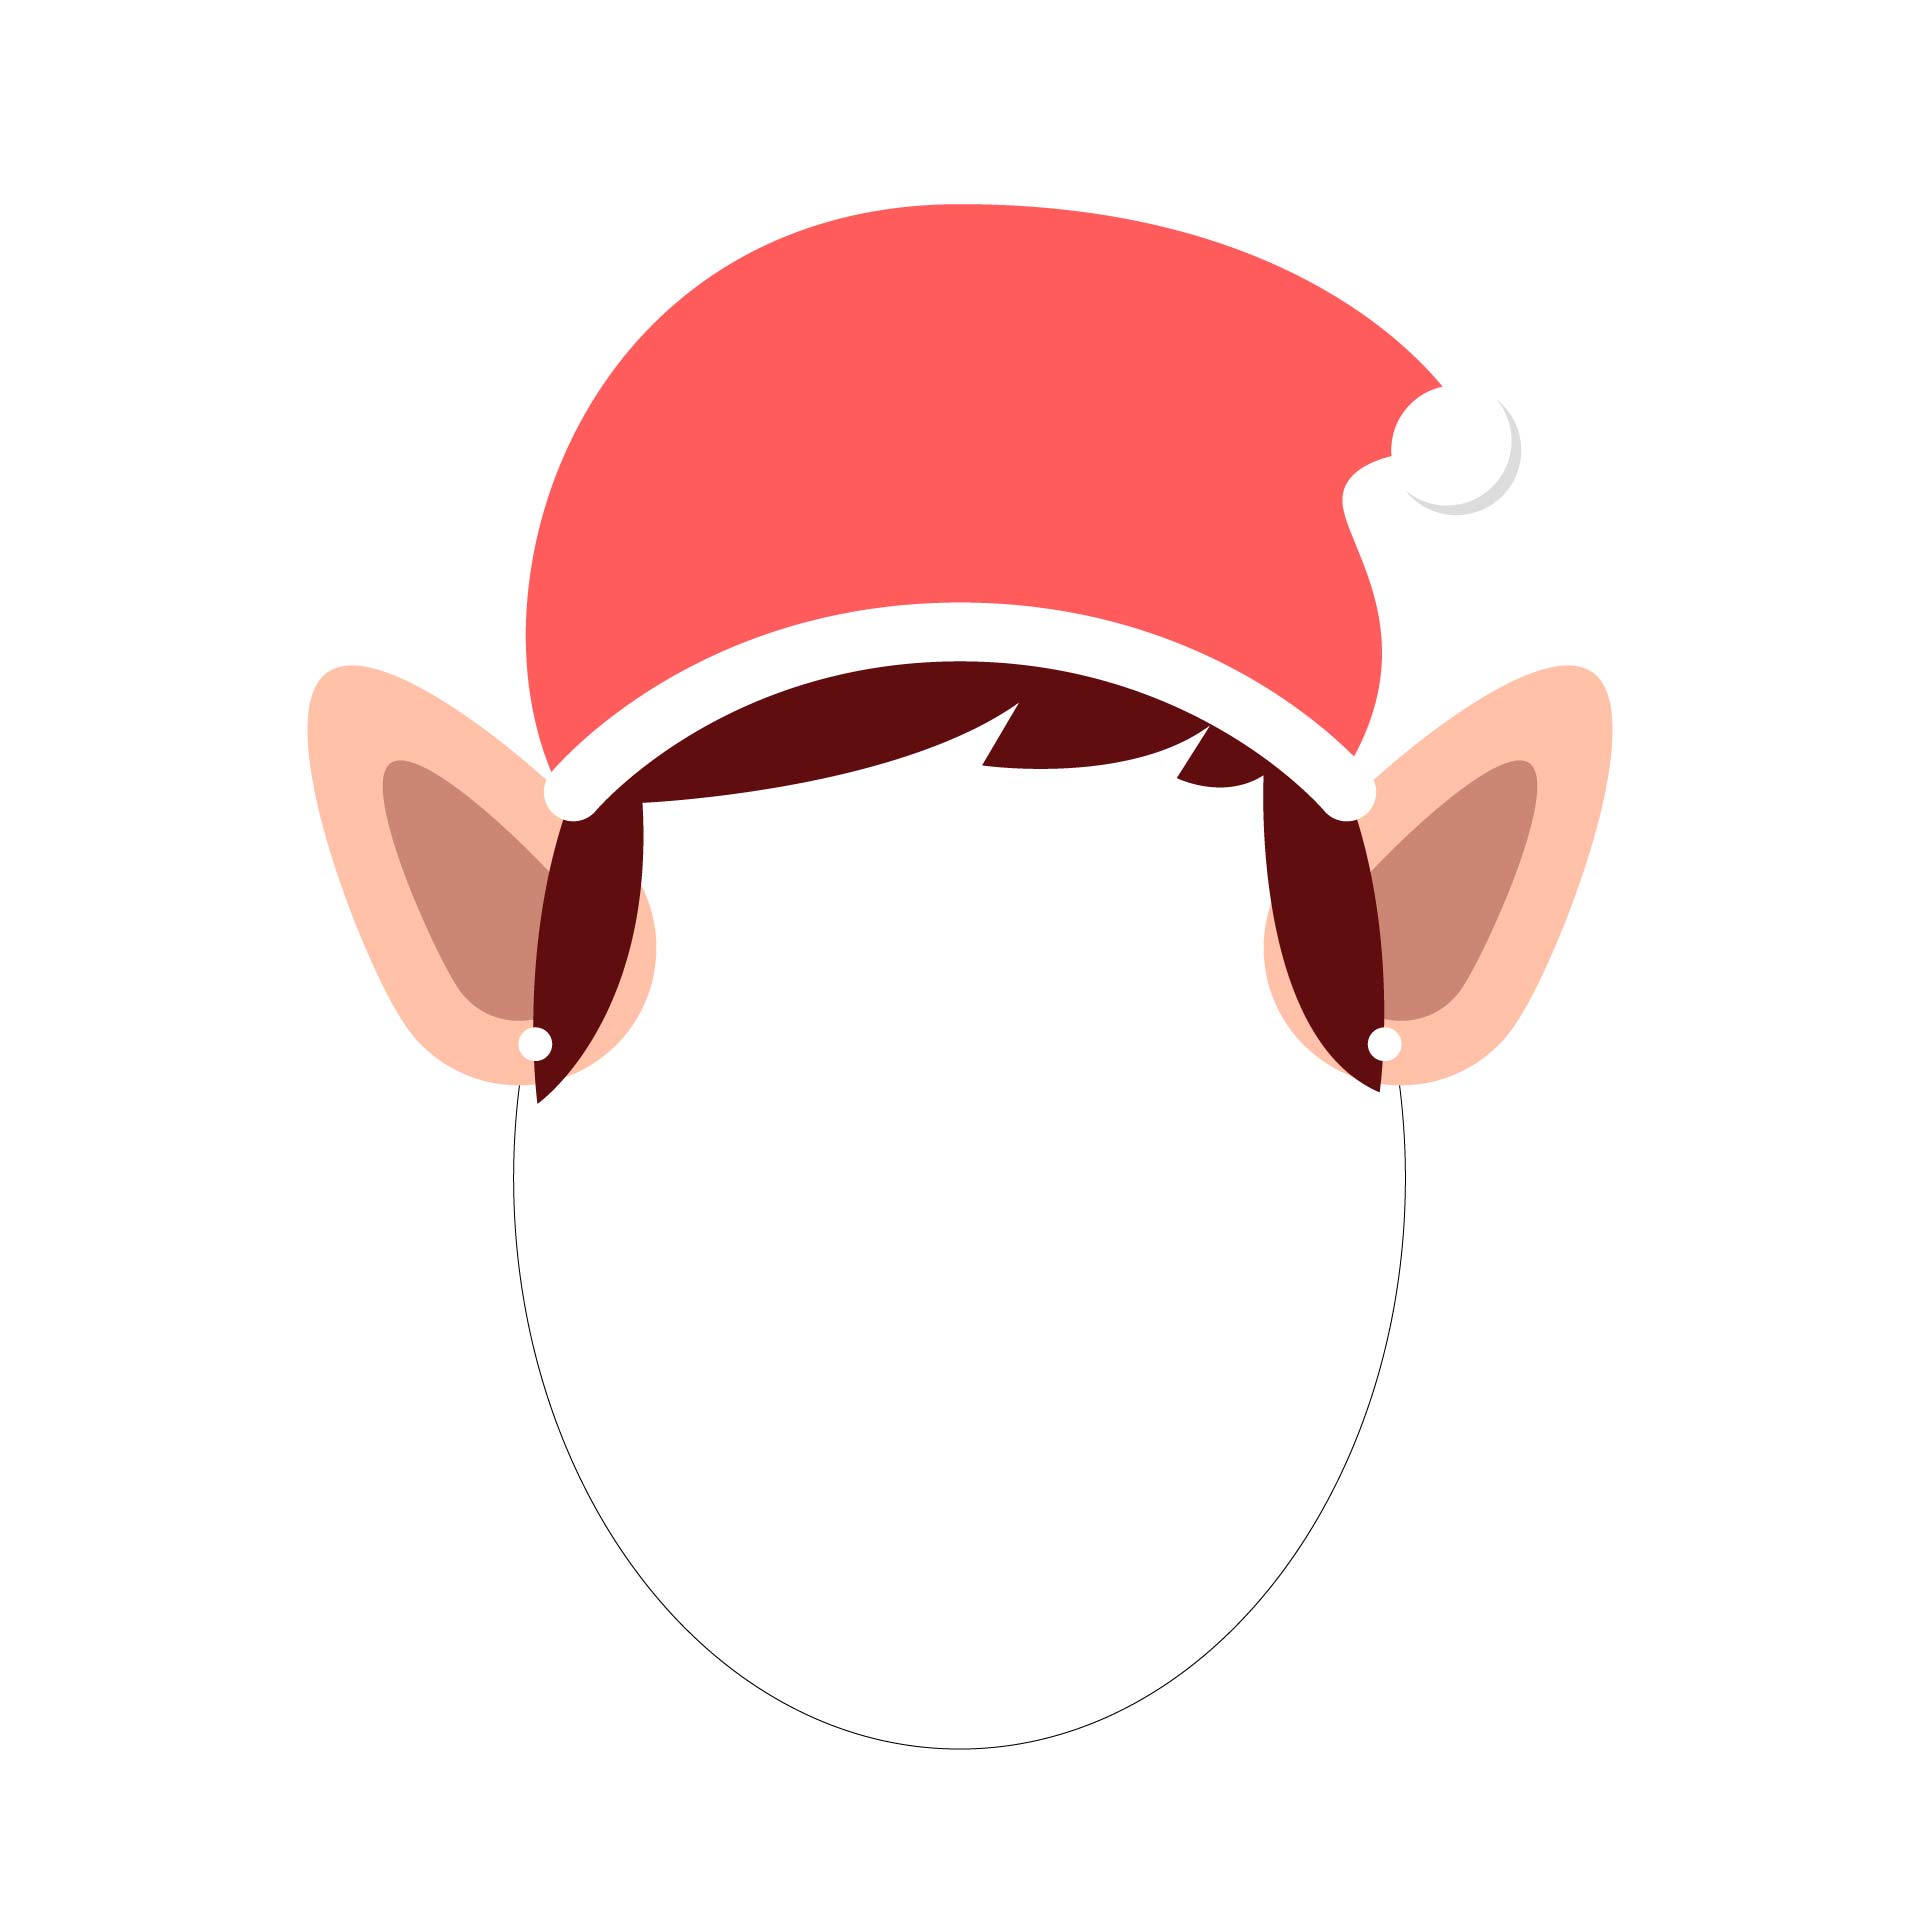 7 Best Images of Elf Yourself Printable Template Elf Yourself Craft